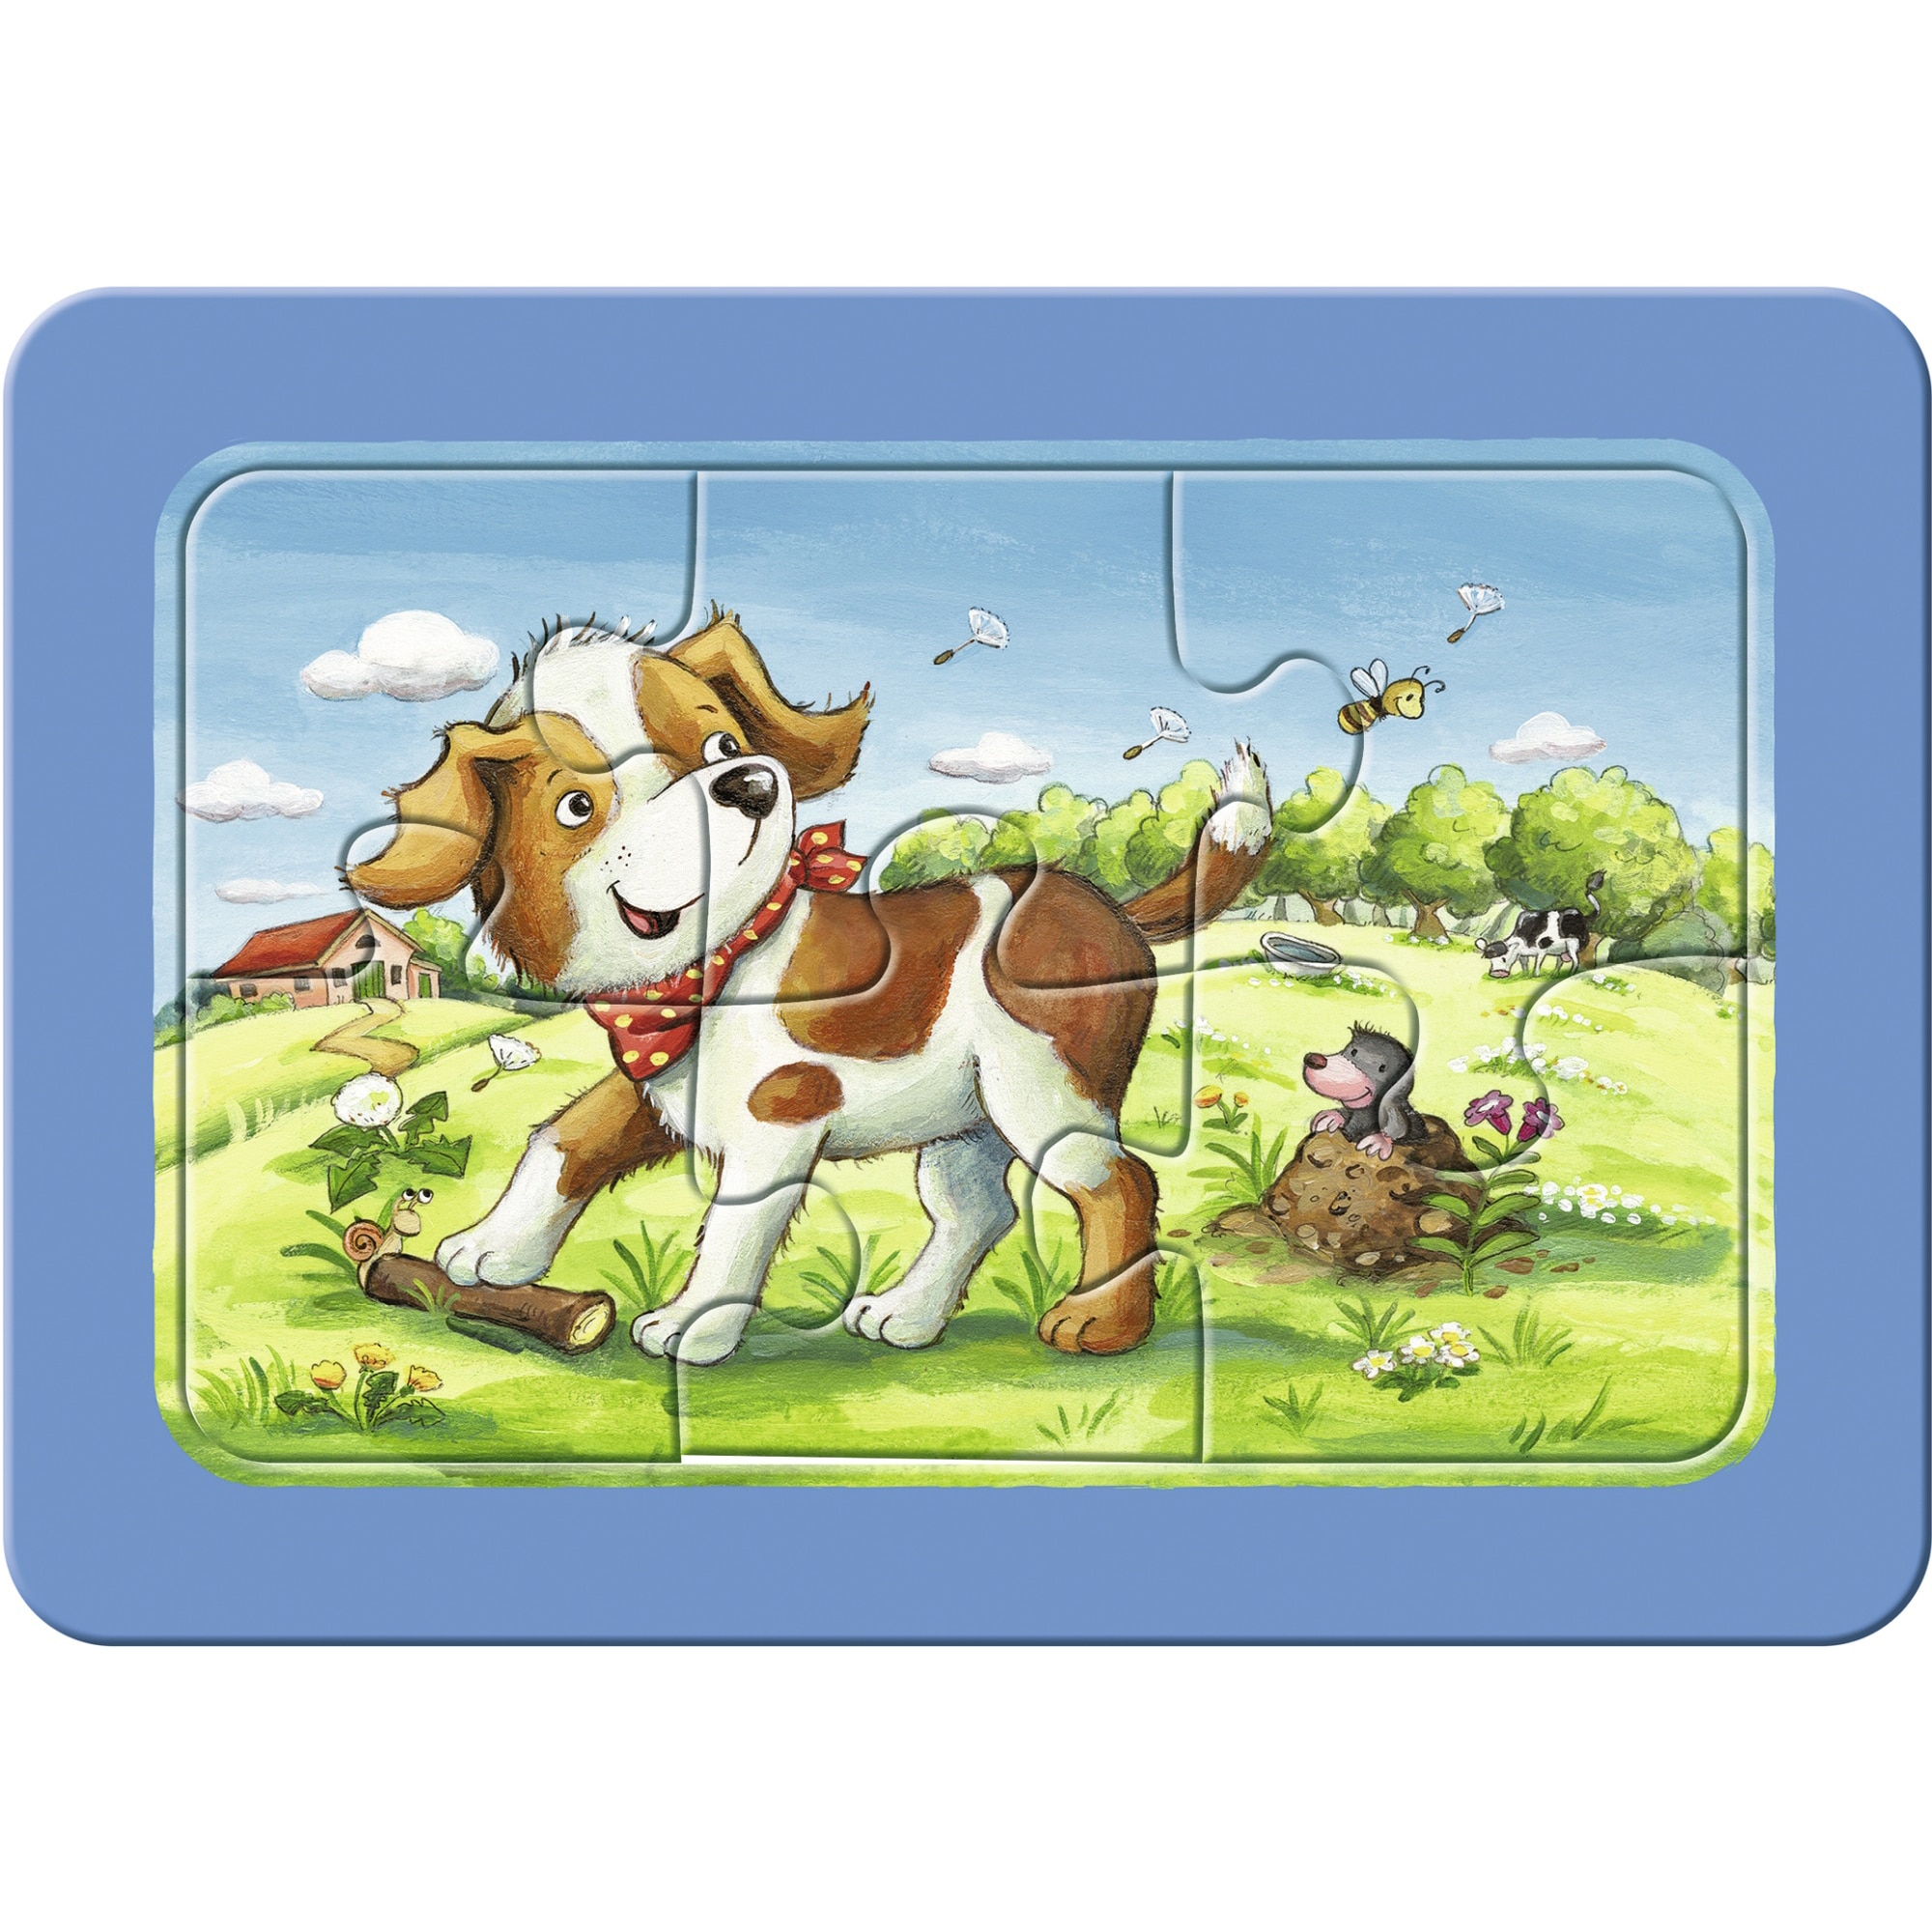 Puzzle 3x6 piese - Animalute | Ravensburger - 2